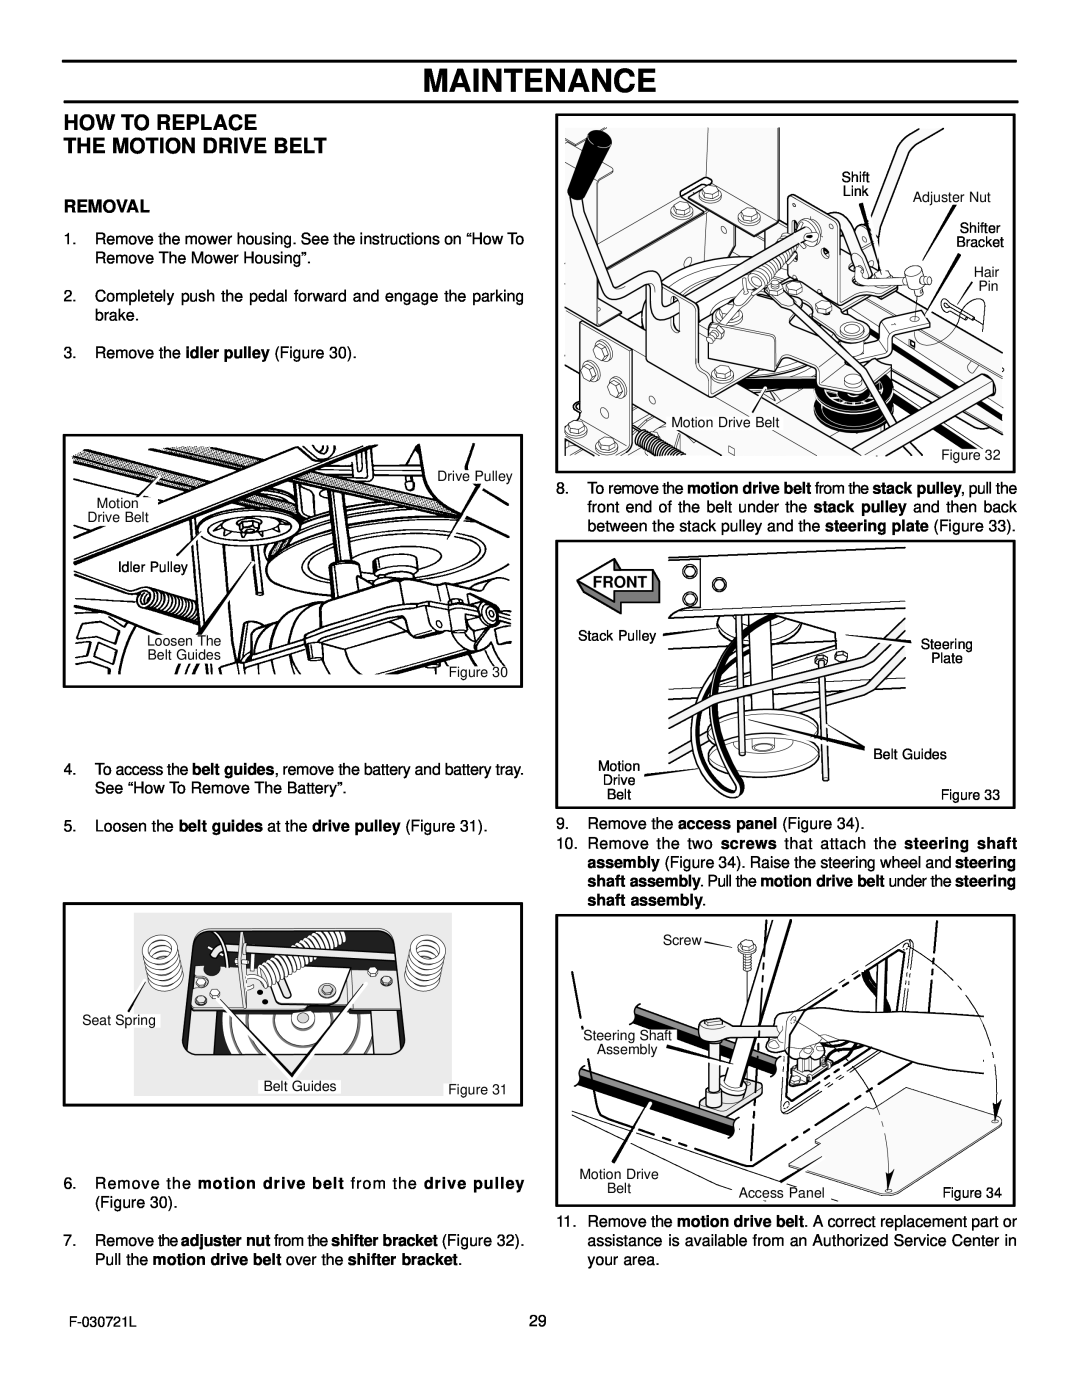 Murray 425007x92B manual Maintenance, How To Replace The Motion Drive Belt, Removal 